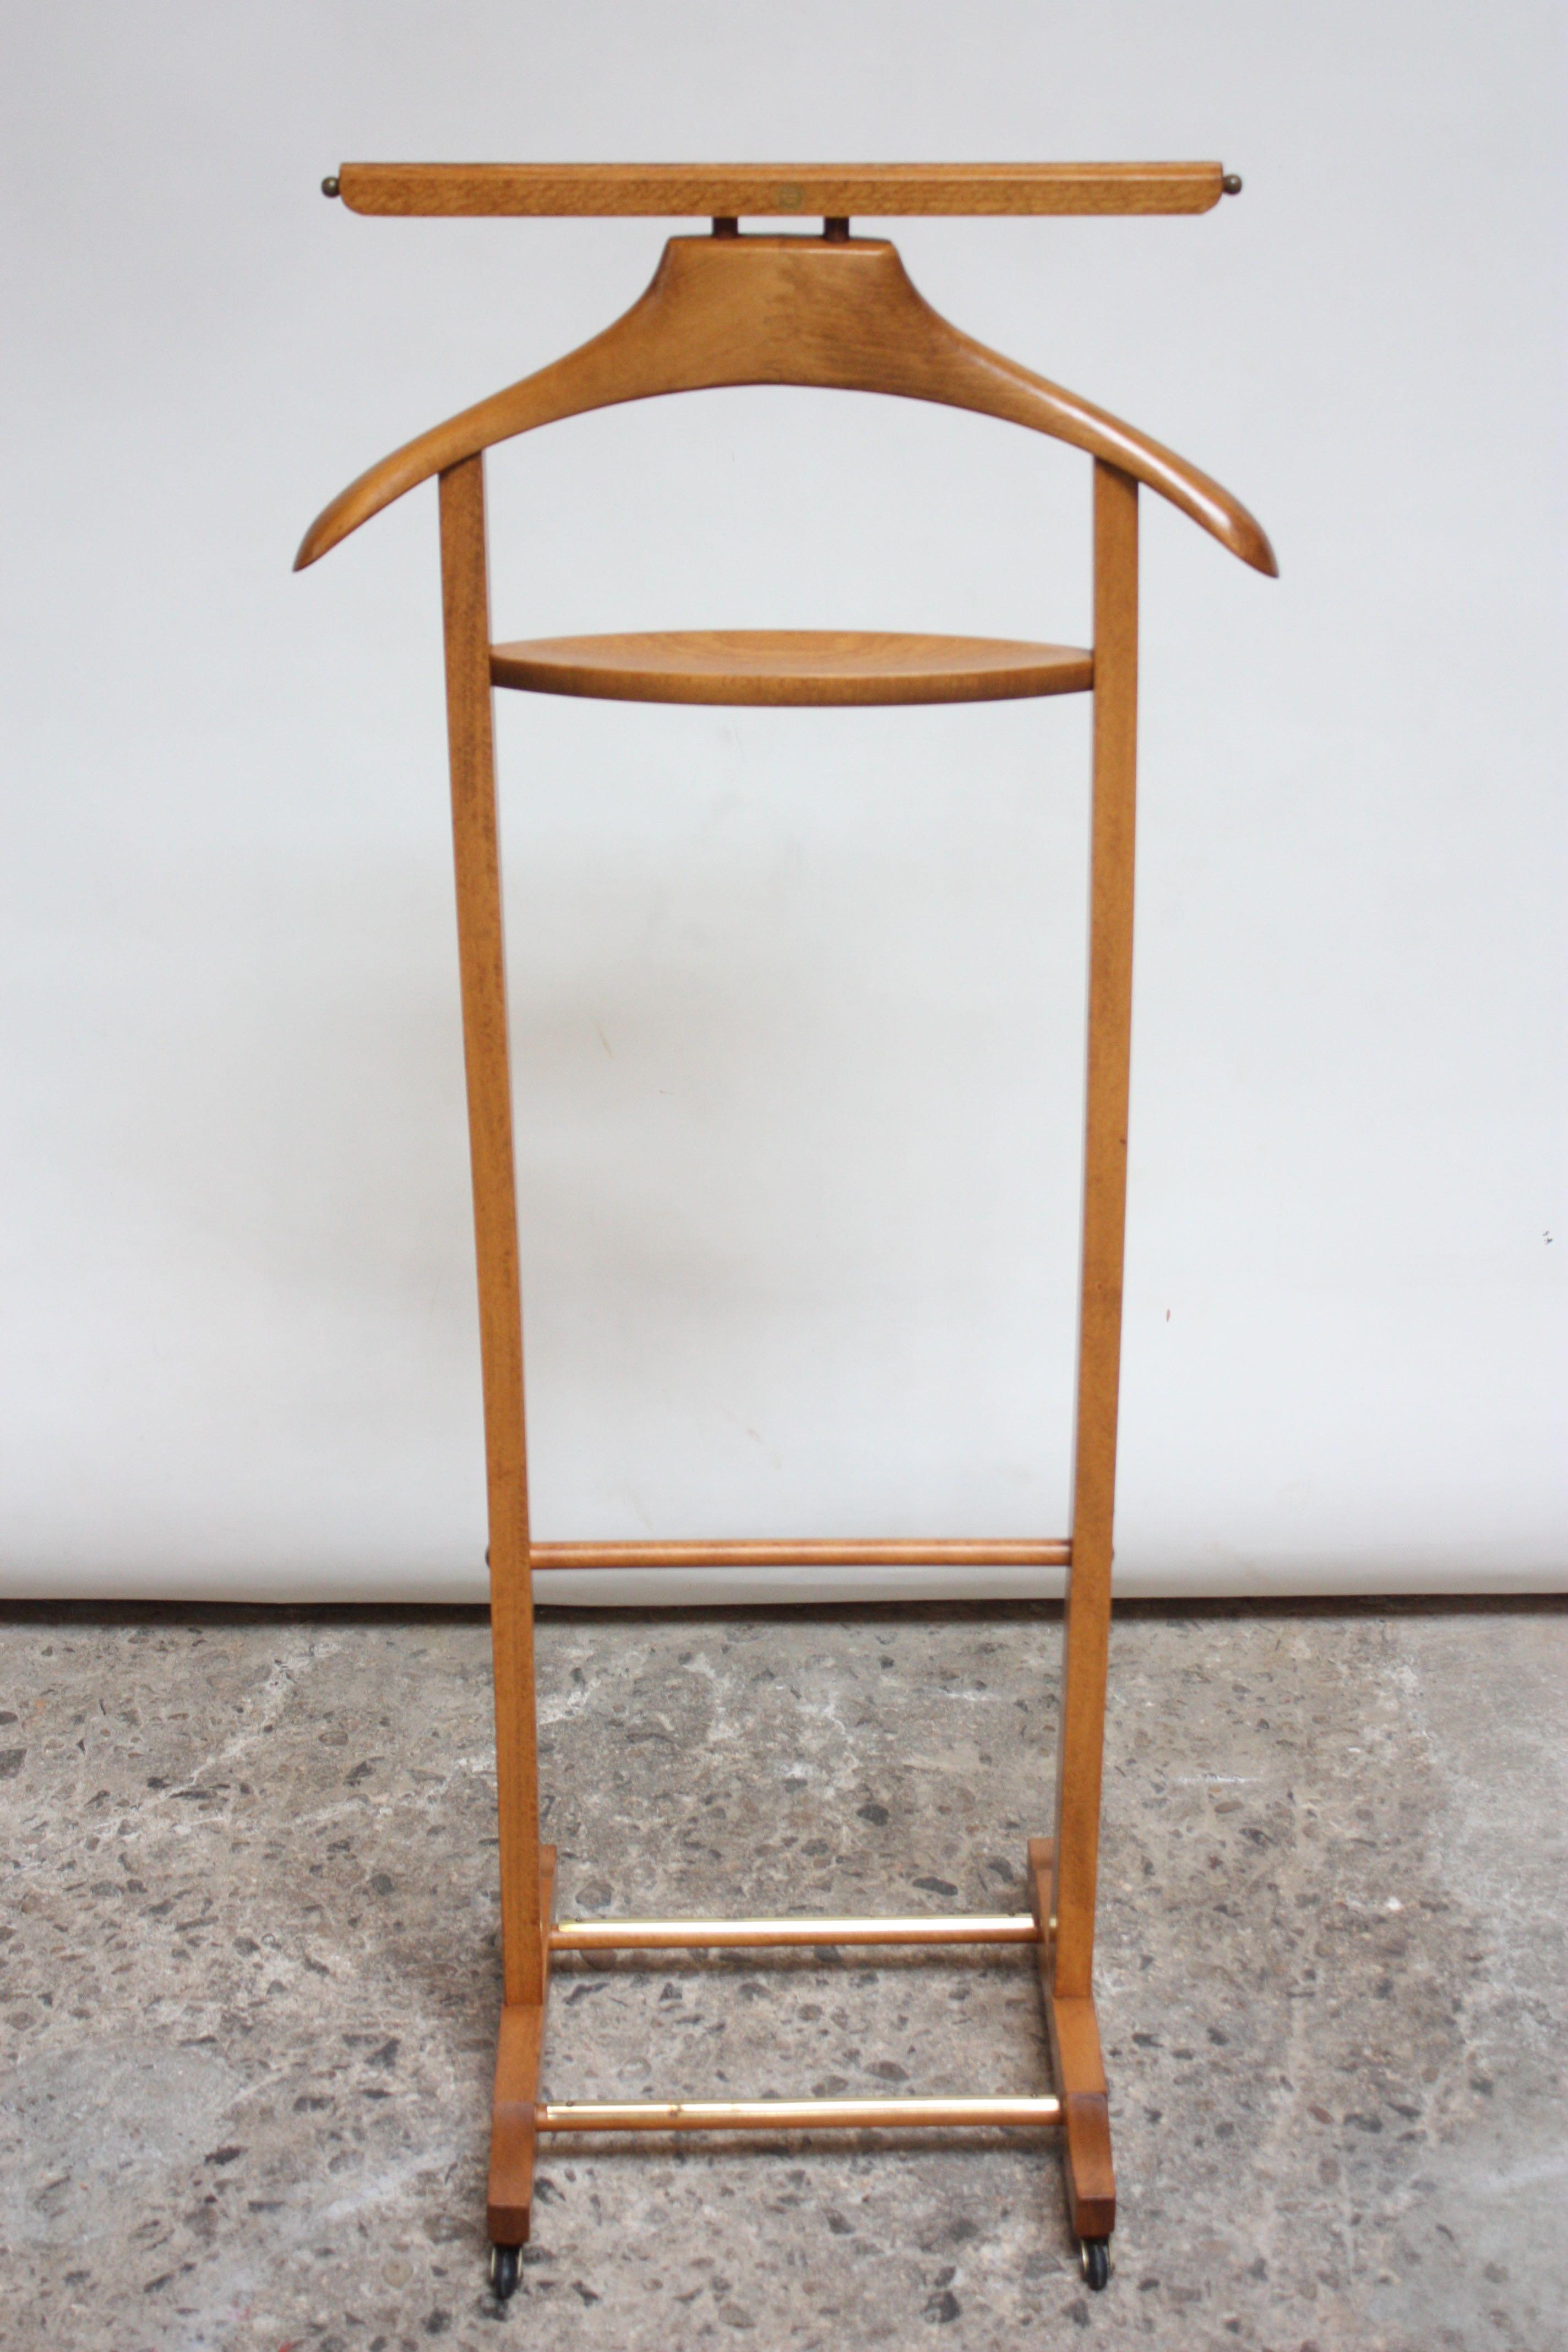 This Italian maple valet was designed by Fratelli Reguitti in the 1950s. Composed of a frame/hanger and change or cufflink holder with a double rack on the bottom for shoes and four caster wheels for easy mobility. The top bar (intended for hanging